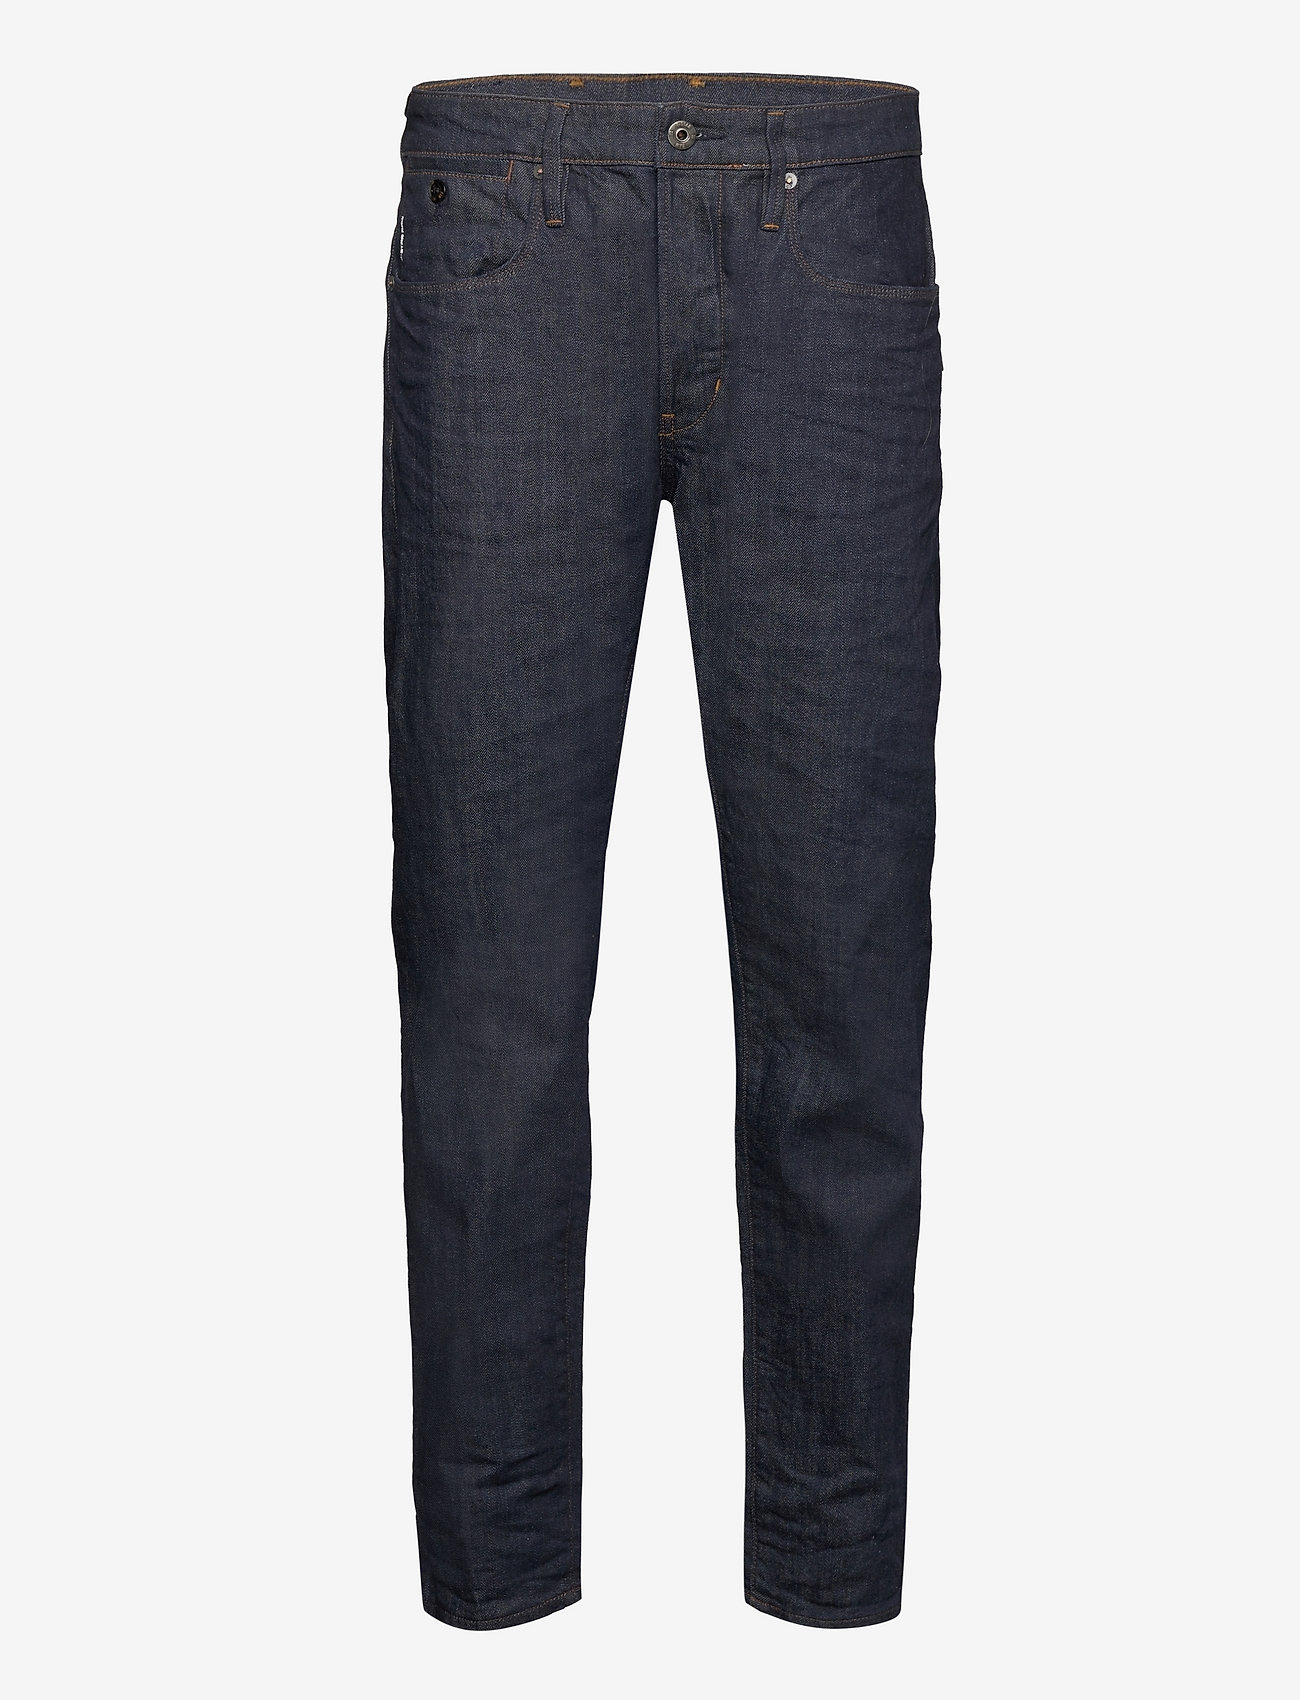 G-Star RAW - Loic relaxed tapered - tapered jeans - 3d raw denim - 0